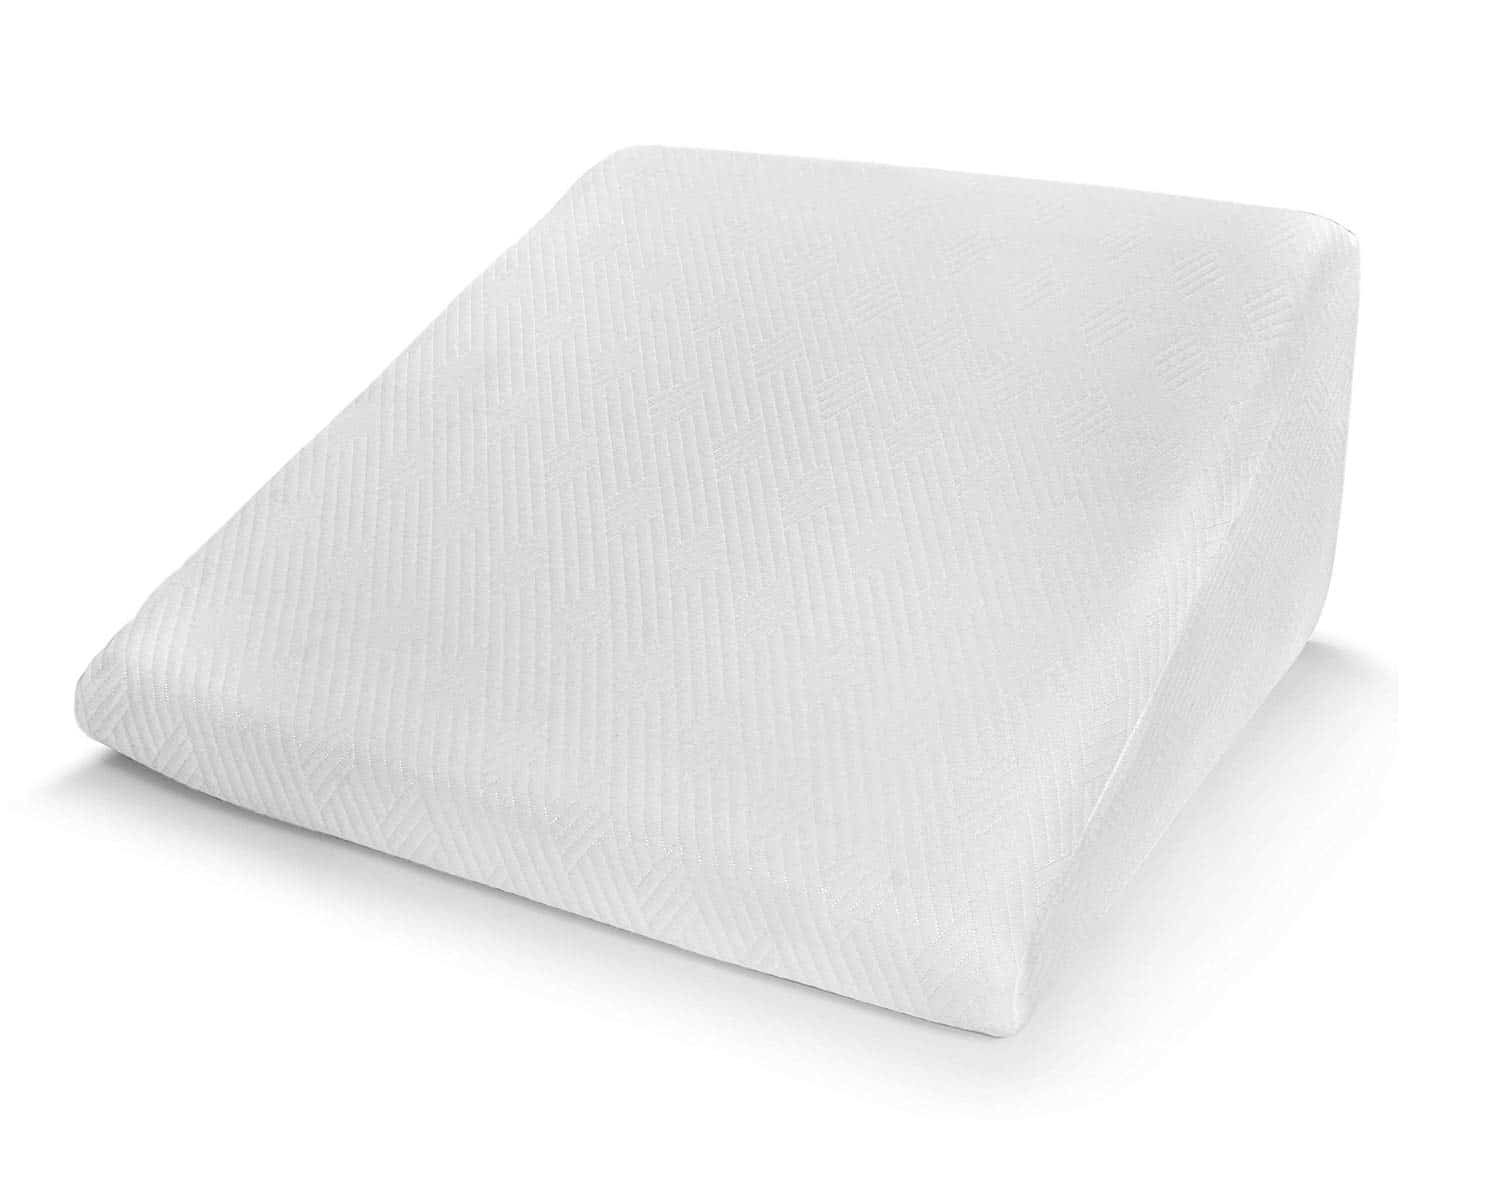 Chemica Products Bed Wedge Pillow for Sleeping